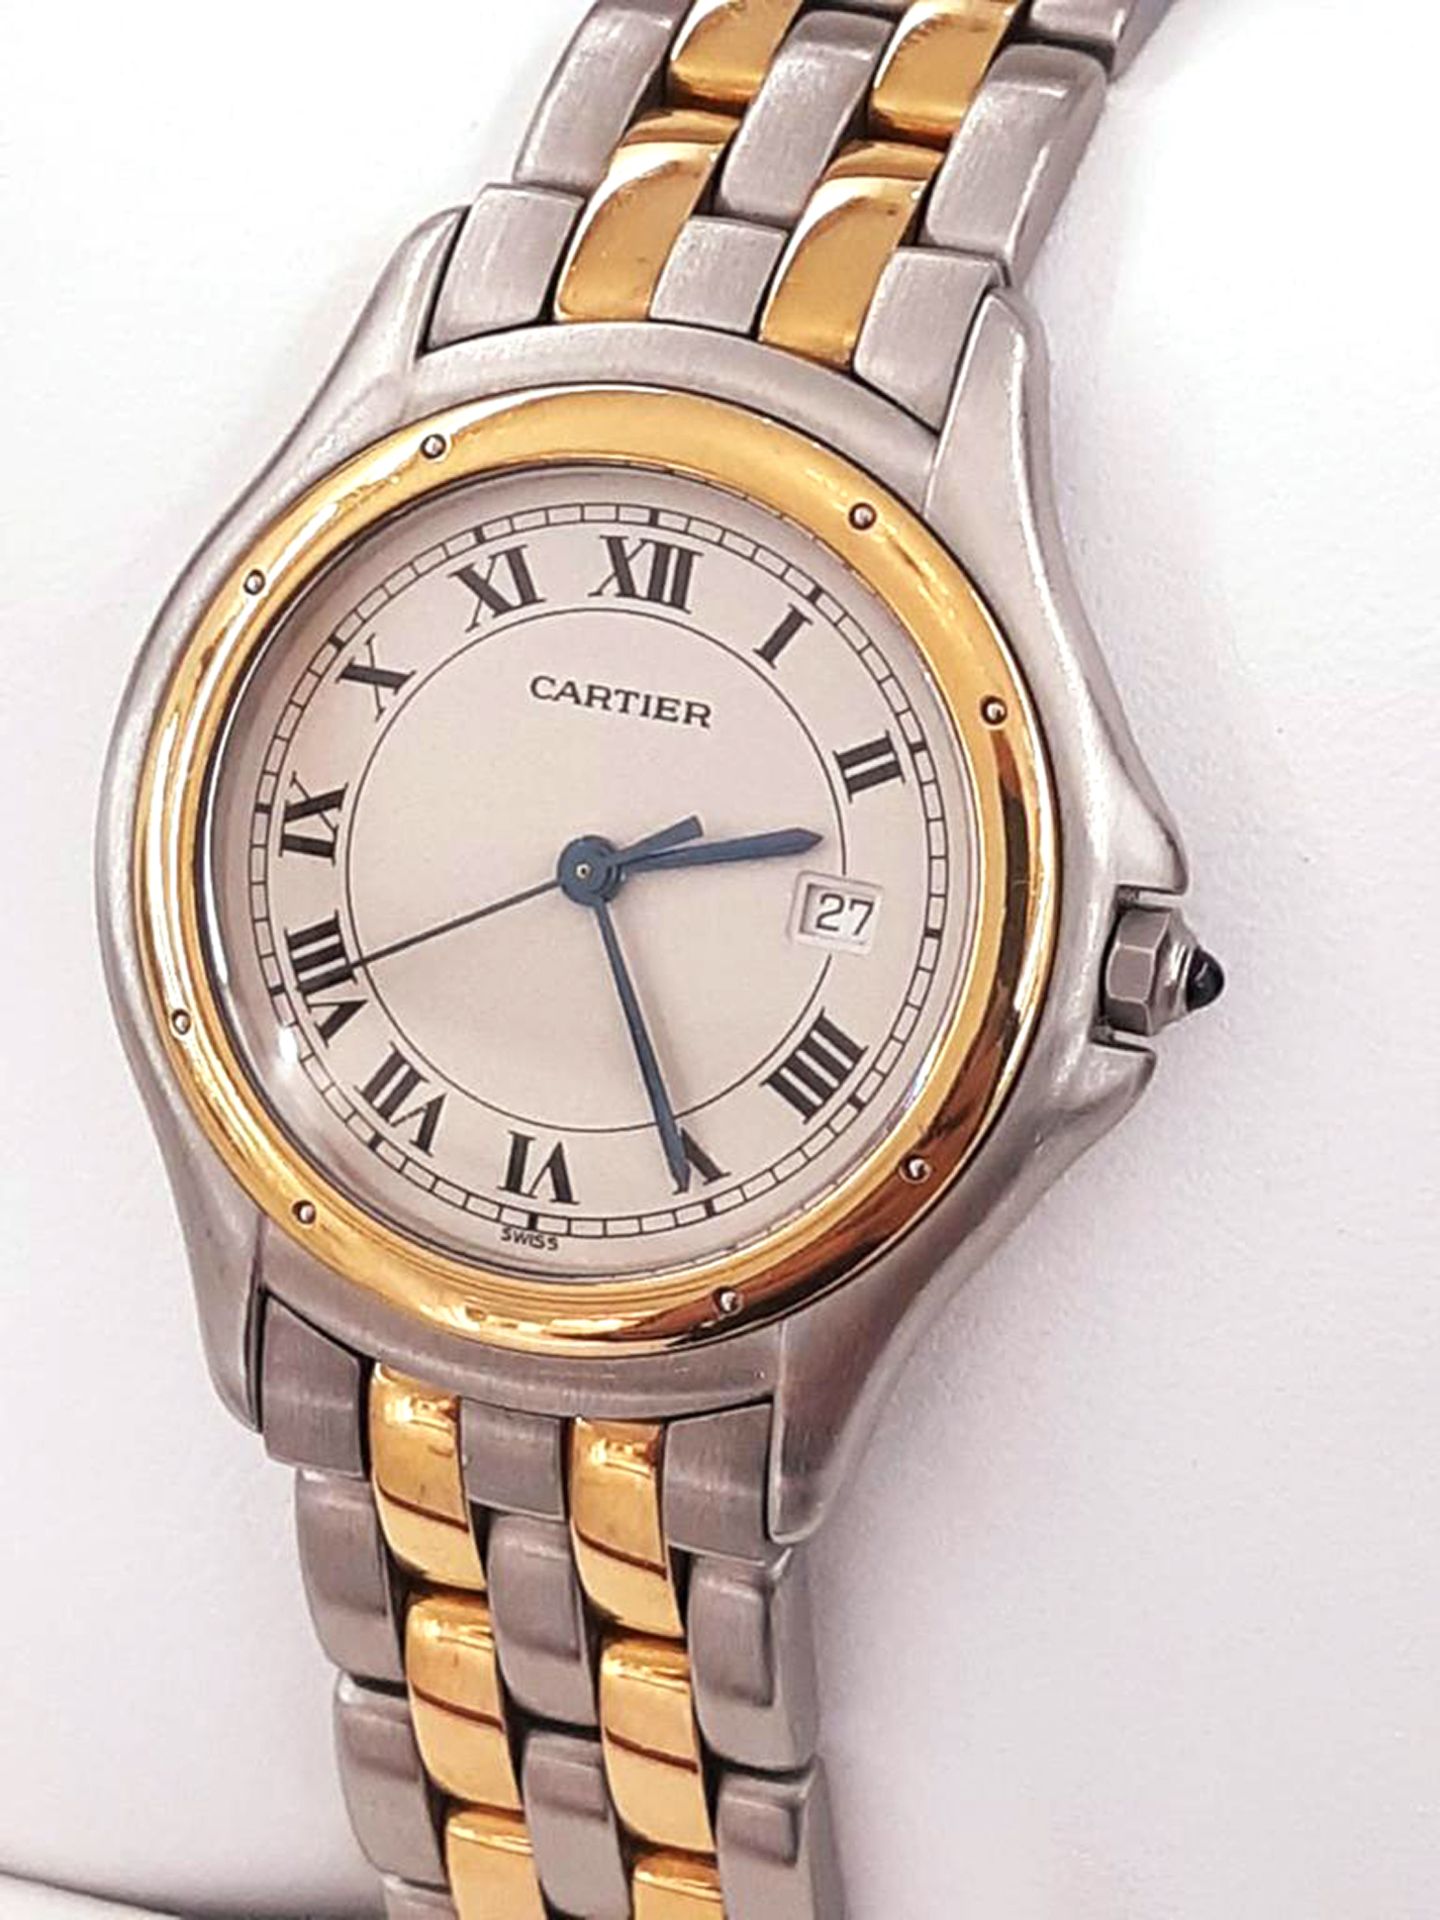 CARTIER COUGAR WATCH IN STEEL AND GOLD 33mm - Image 4 of 6